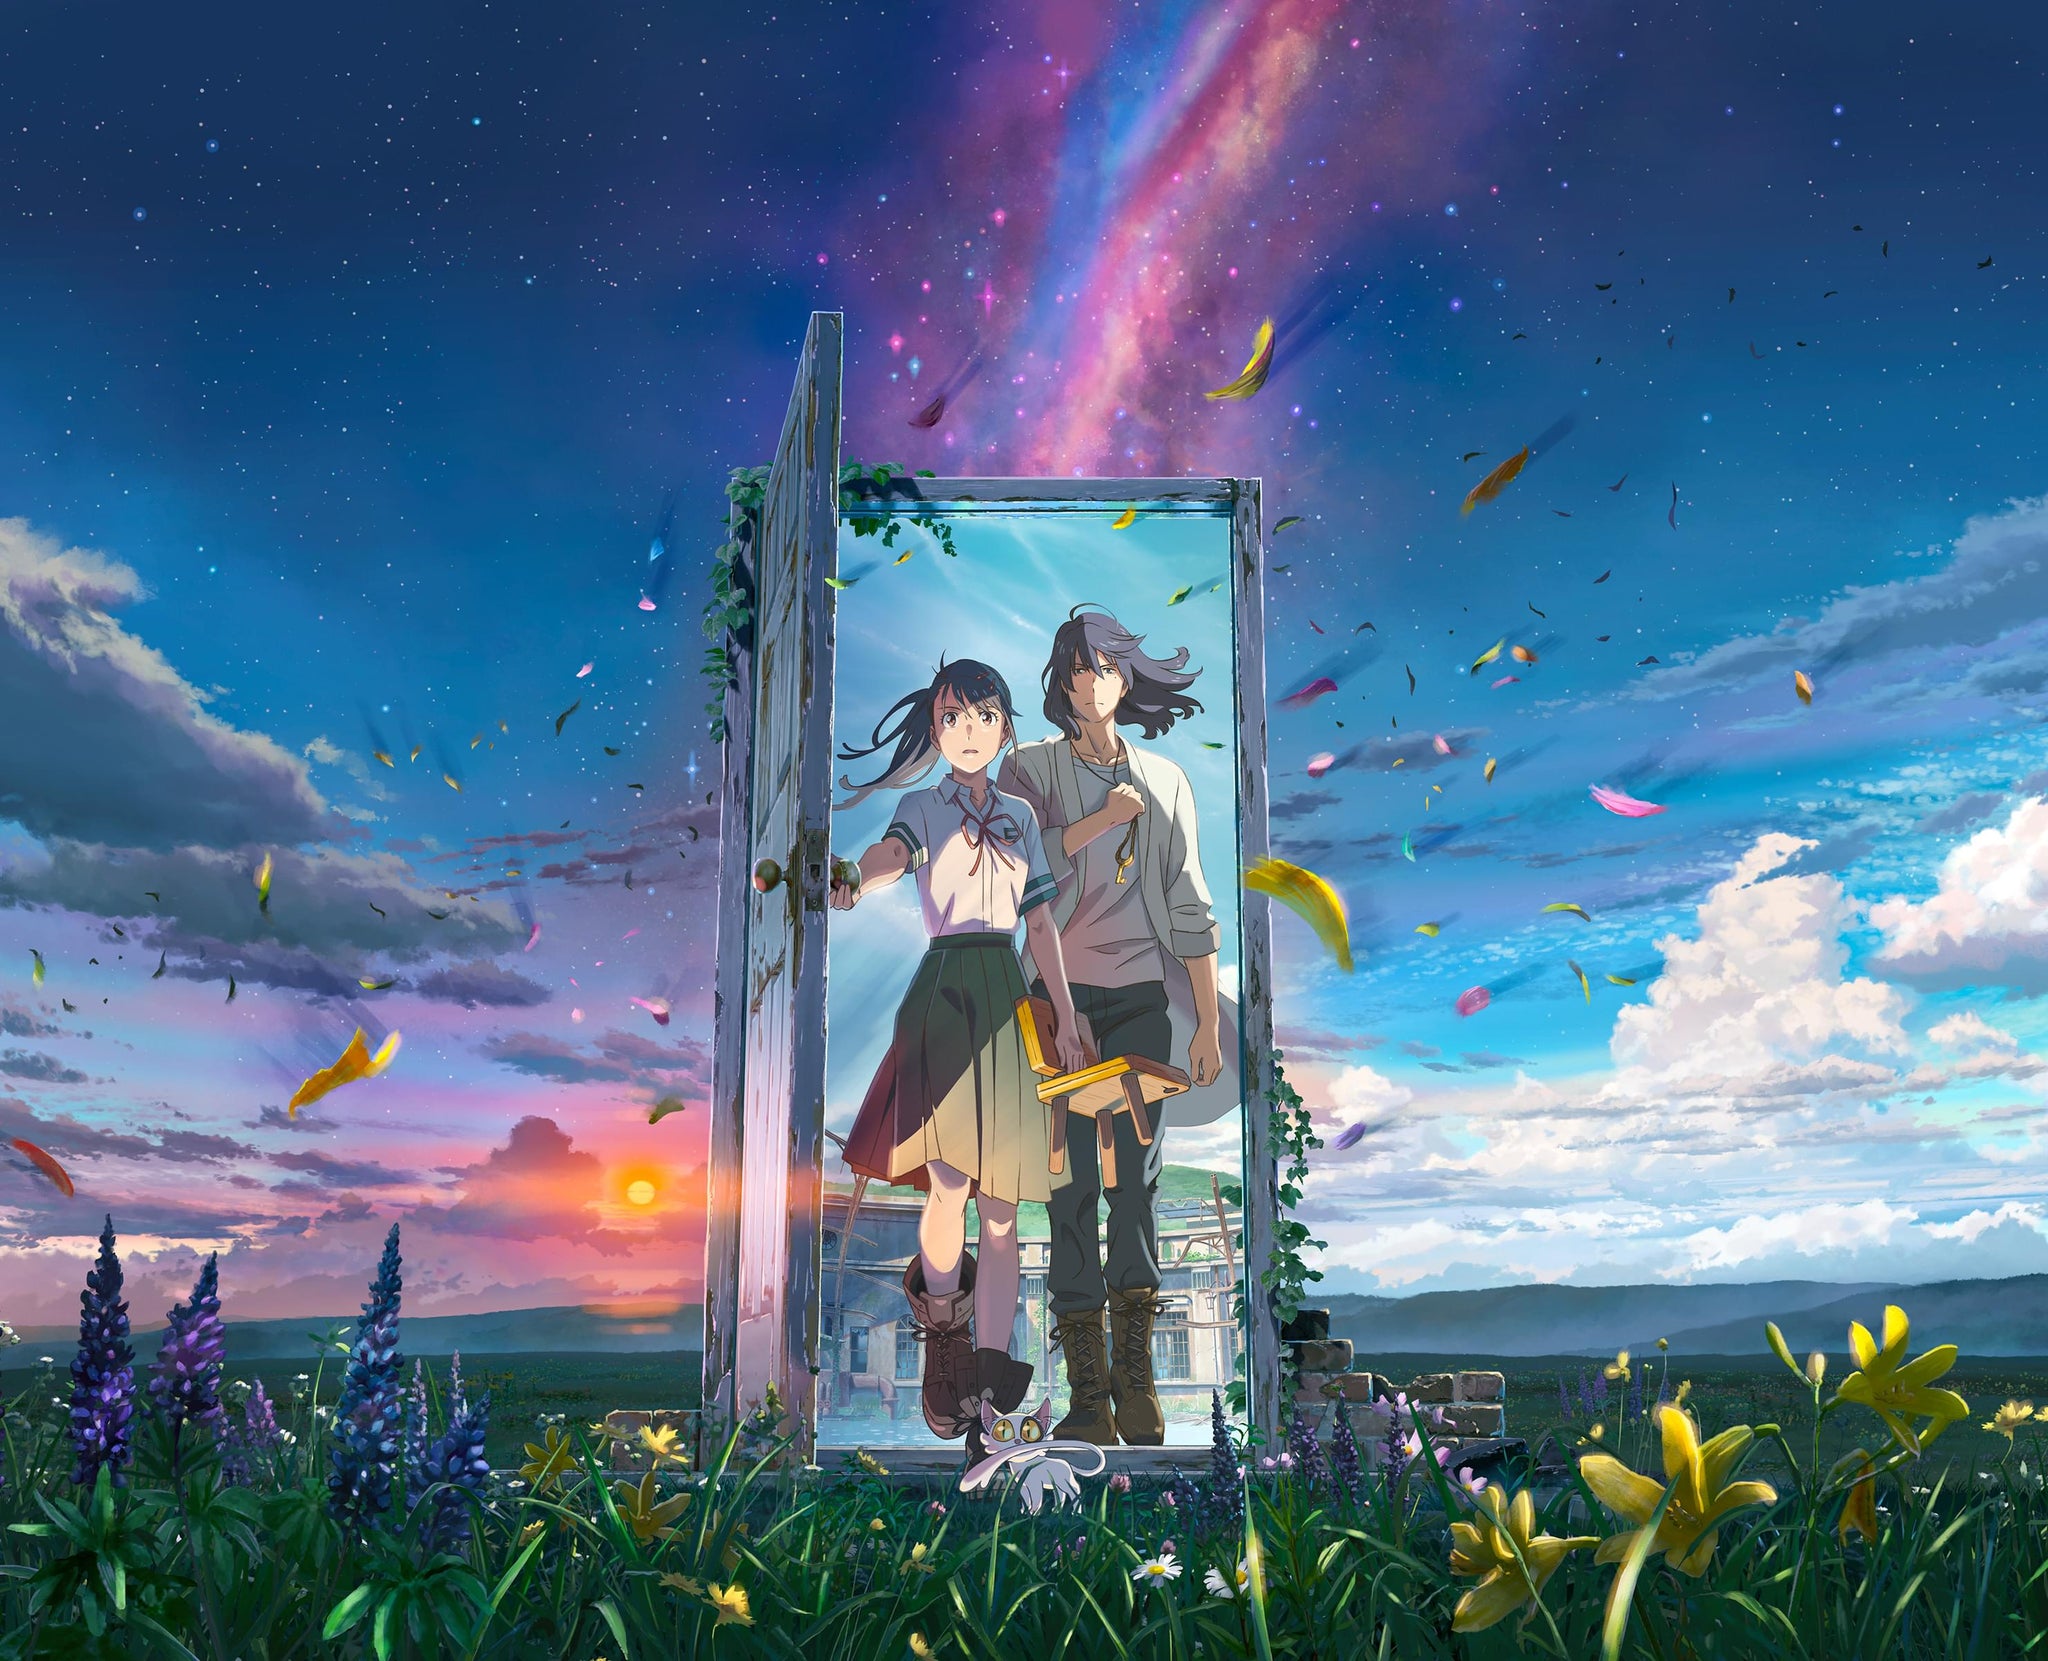 Makoto Shinkai's "Suzume" Surpasses "Jujutsu Kaisen 0" to Become 15th Highest-Grossing Film of All Time in Japan!